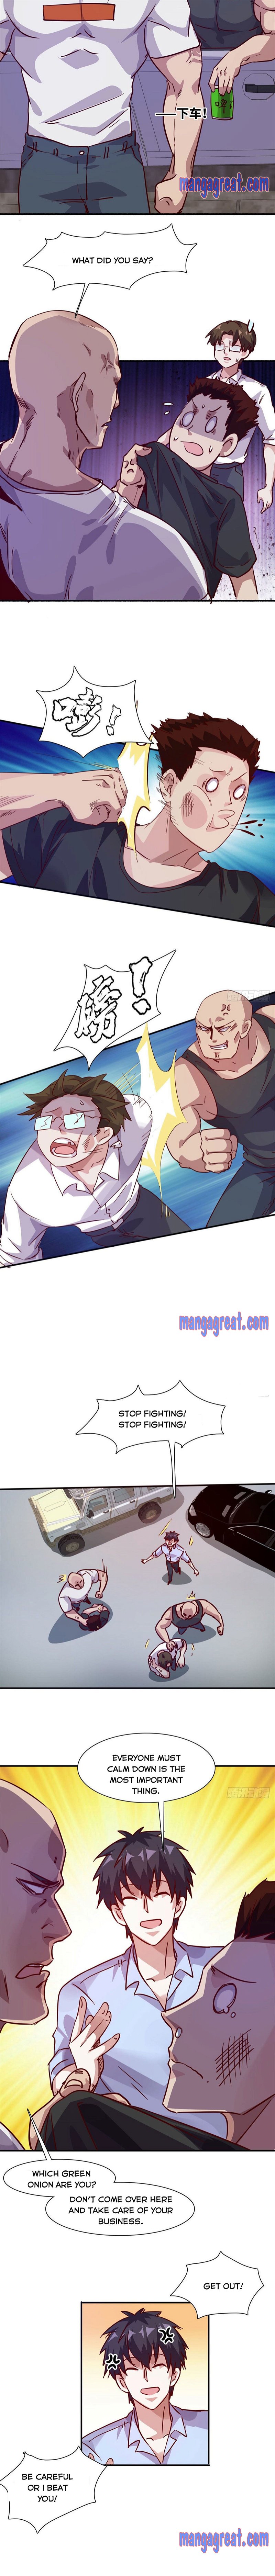 The School Beauty President Is All Over Me Chapter 8 - Page 3